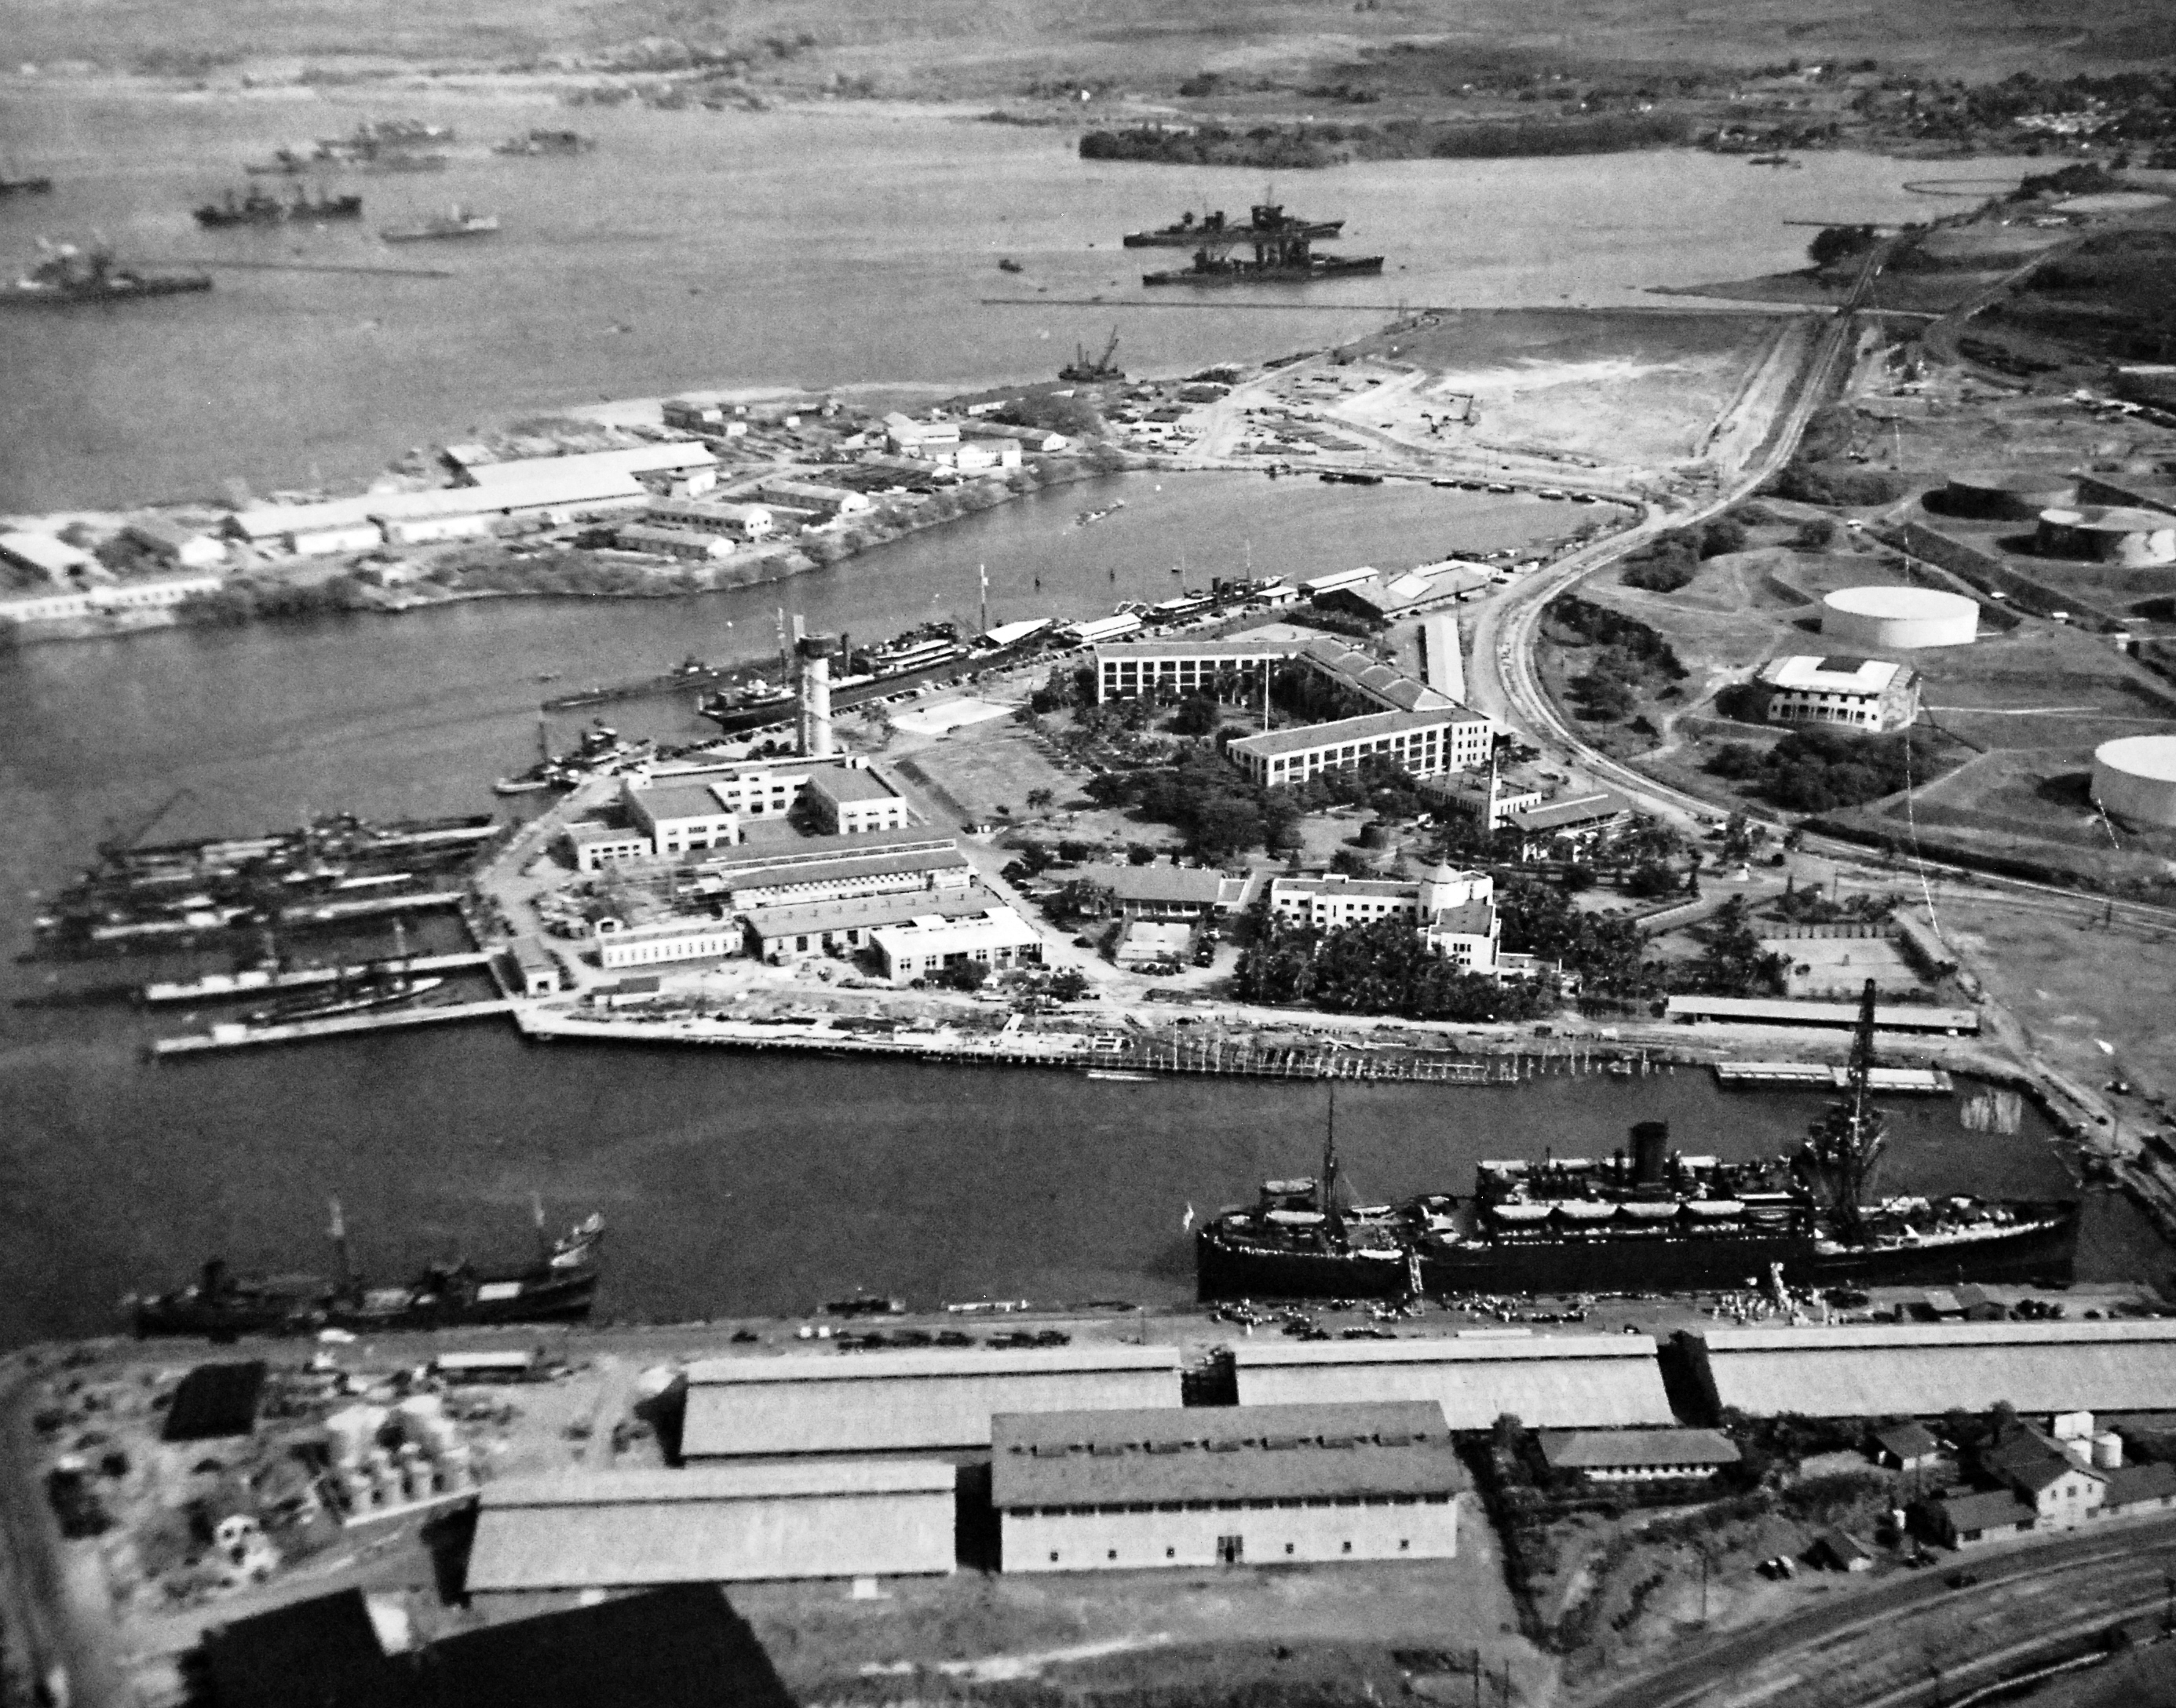 Aerial view of the Pearl Harbor Submarine Piers at Merry Point, 13 Oct 1941. Also pictured is the U-shaped Headquarters Building for the Pacific Fleet and a tank farm at right. Note one tank painted as a building.